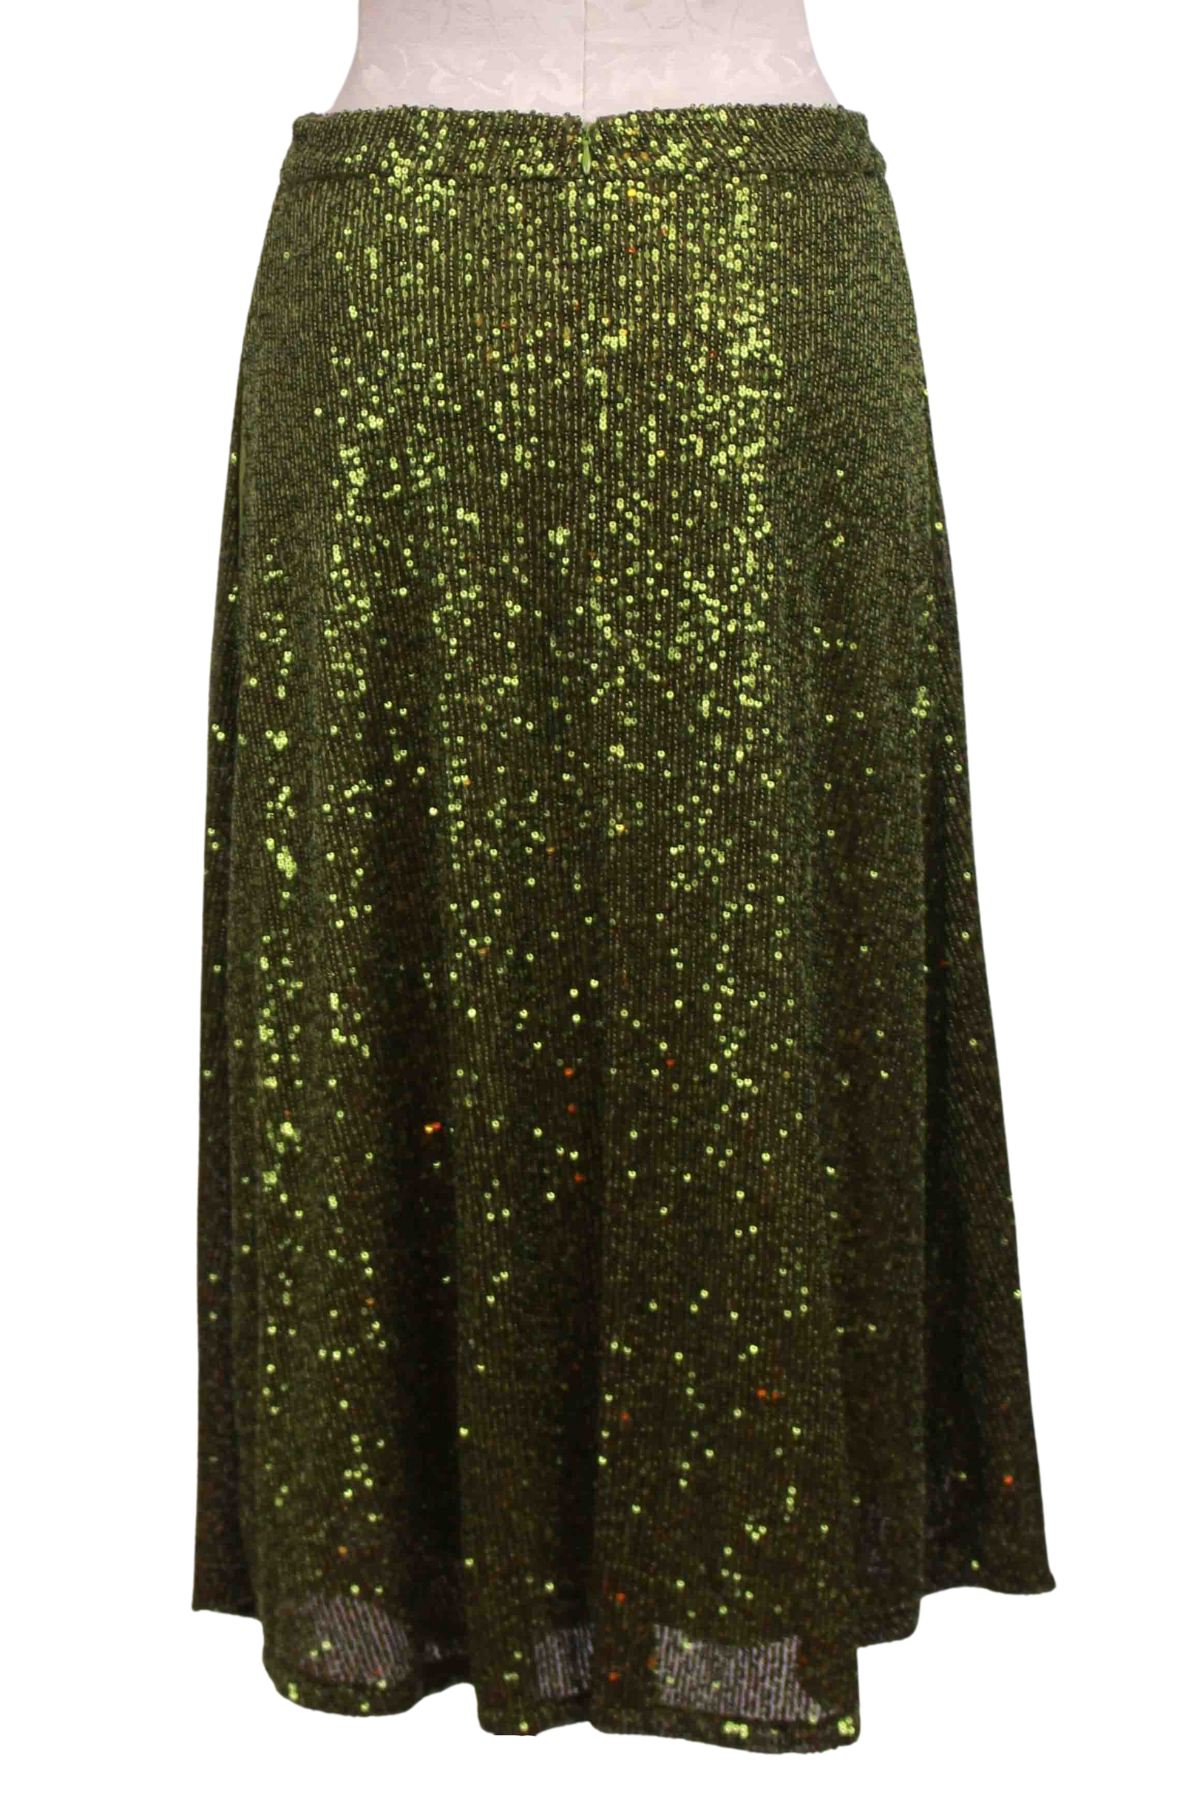 back view of Green Sparkle Sequined Edge of Silence Skirt by Traffic People